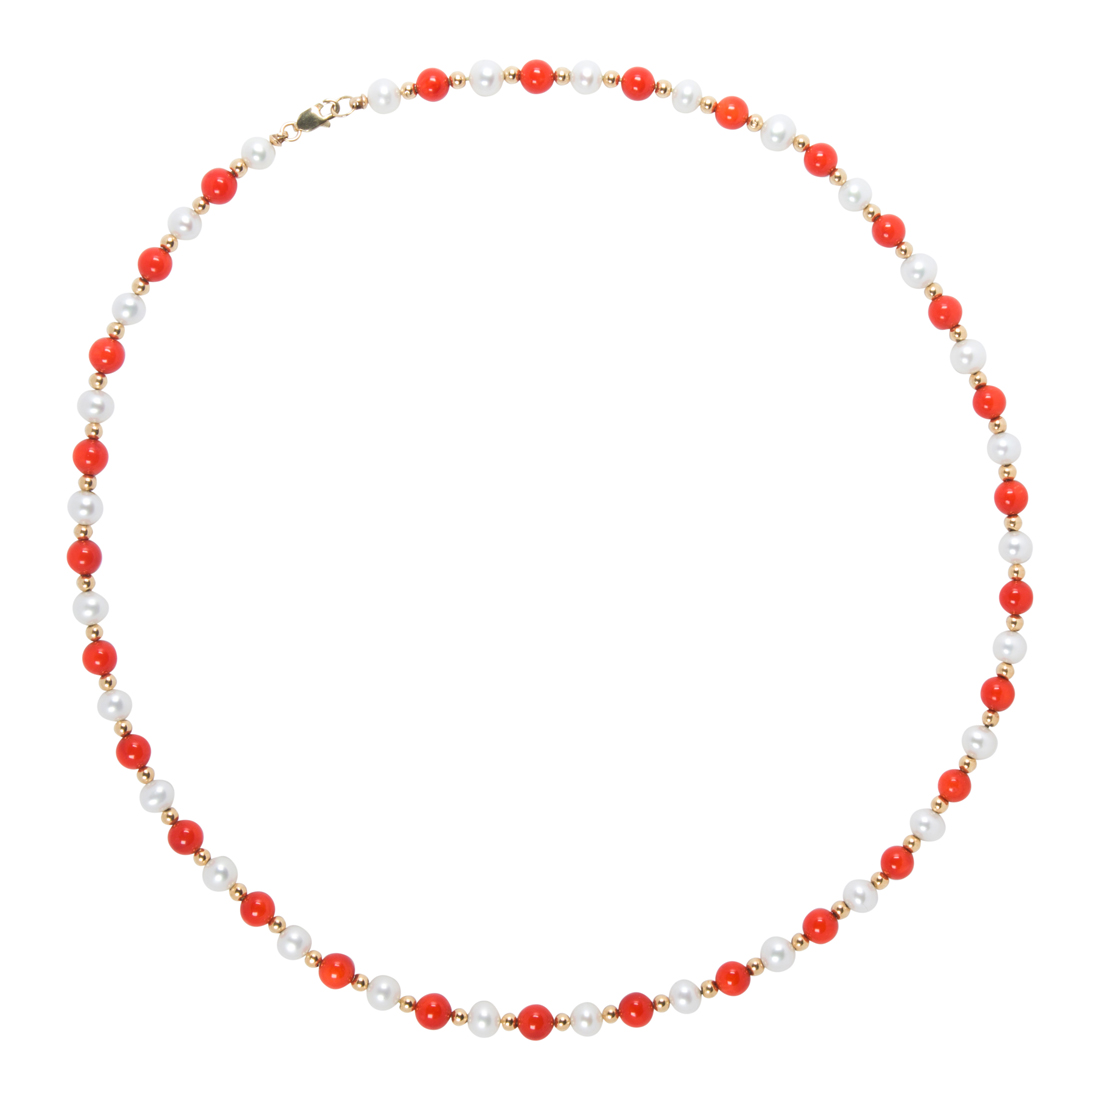 A CORAL CULTURED PEARL AND 14K 3cdb8a